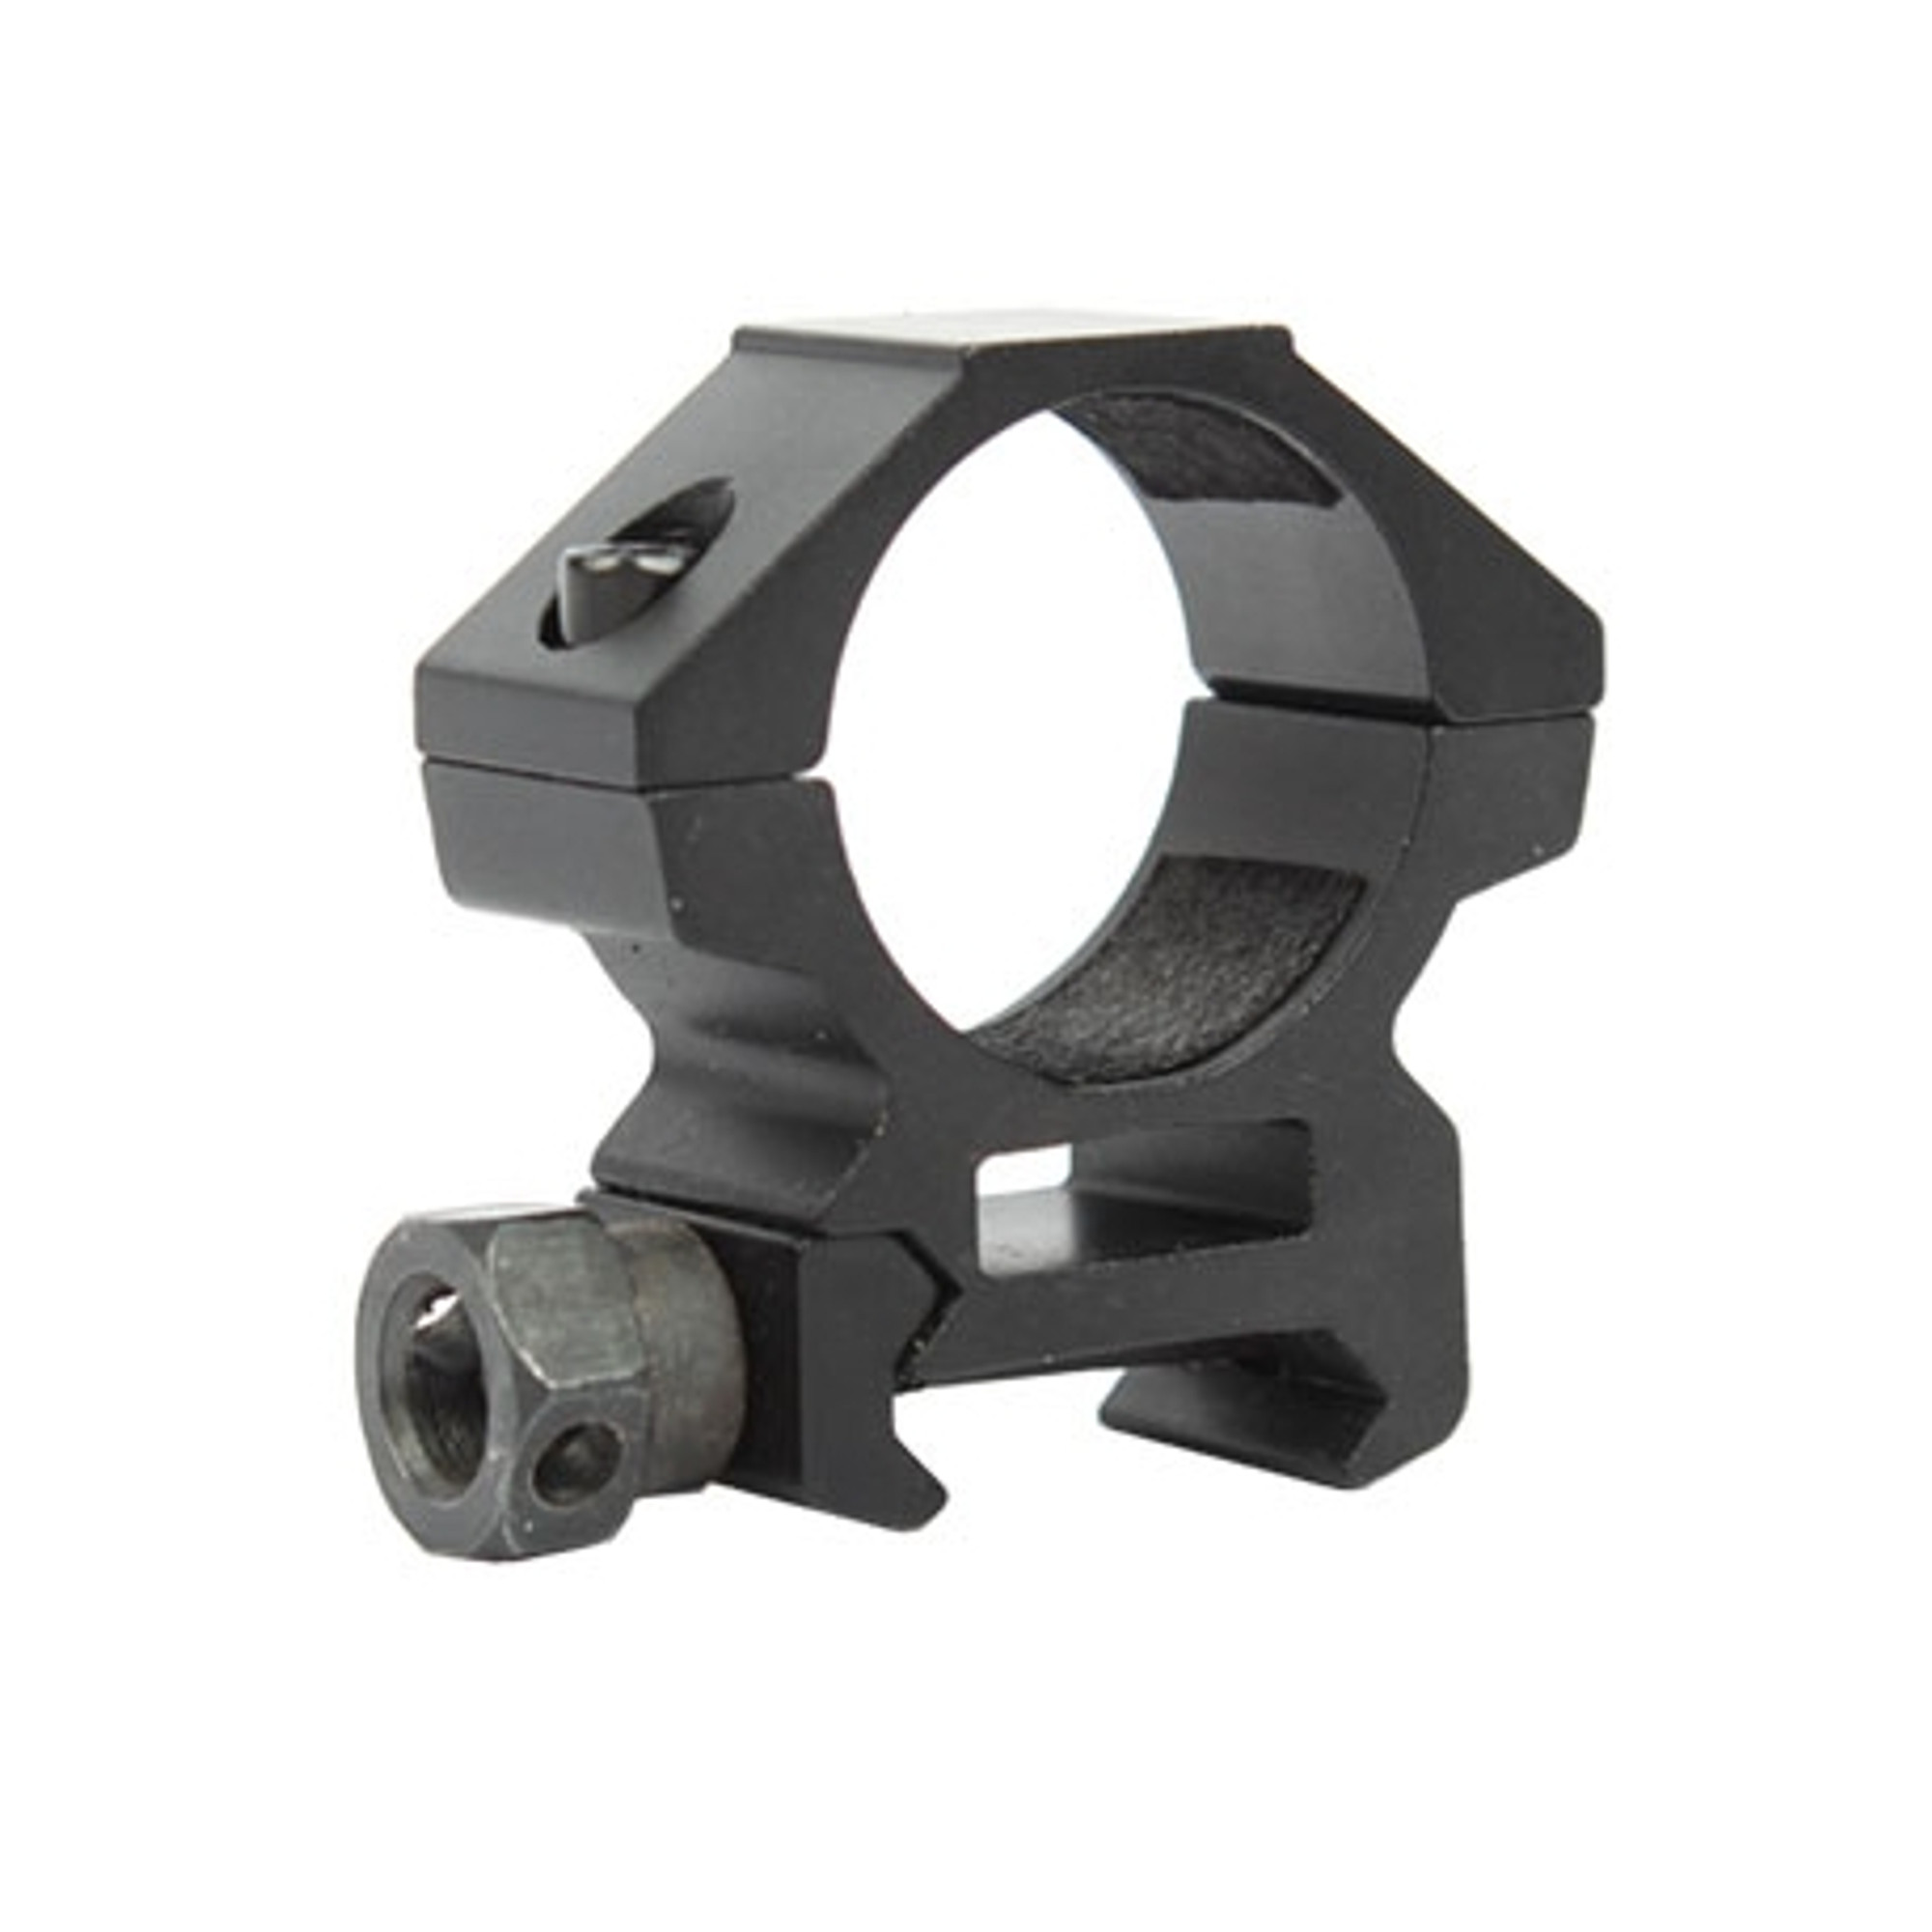 1" Scope Mount Ring For Picatinny Rails